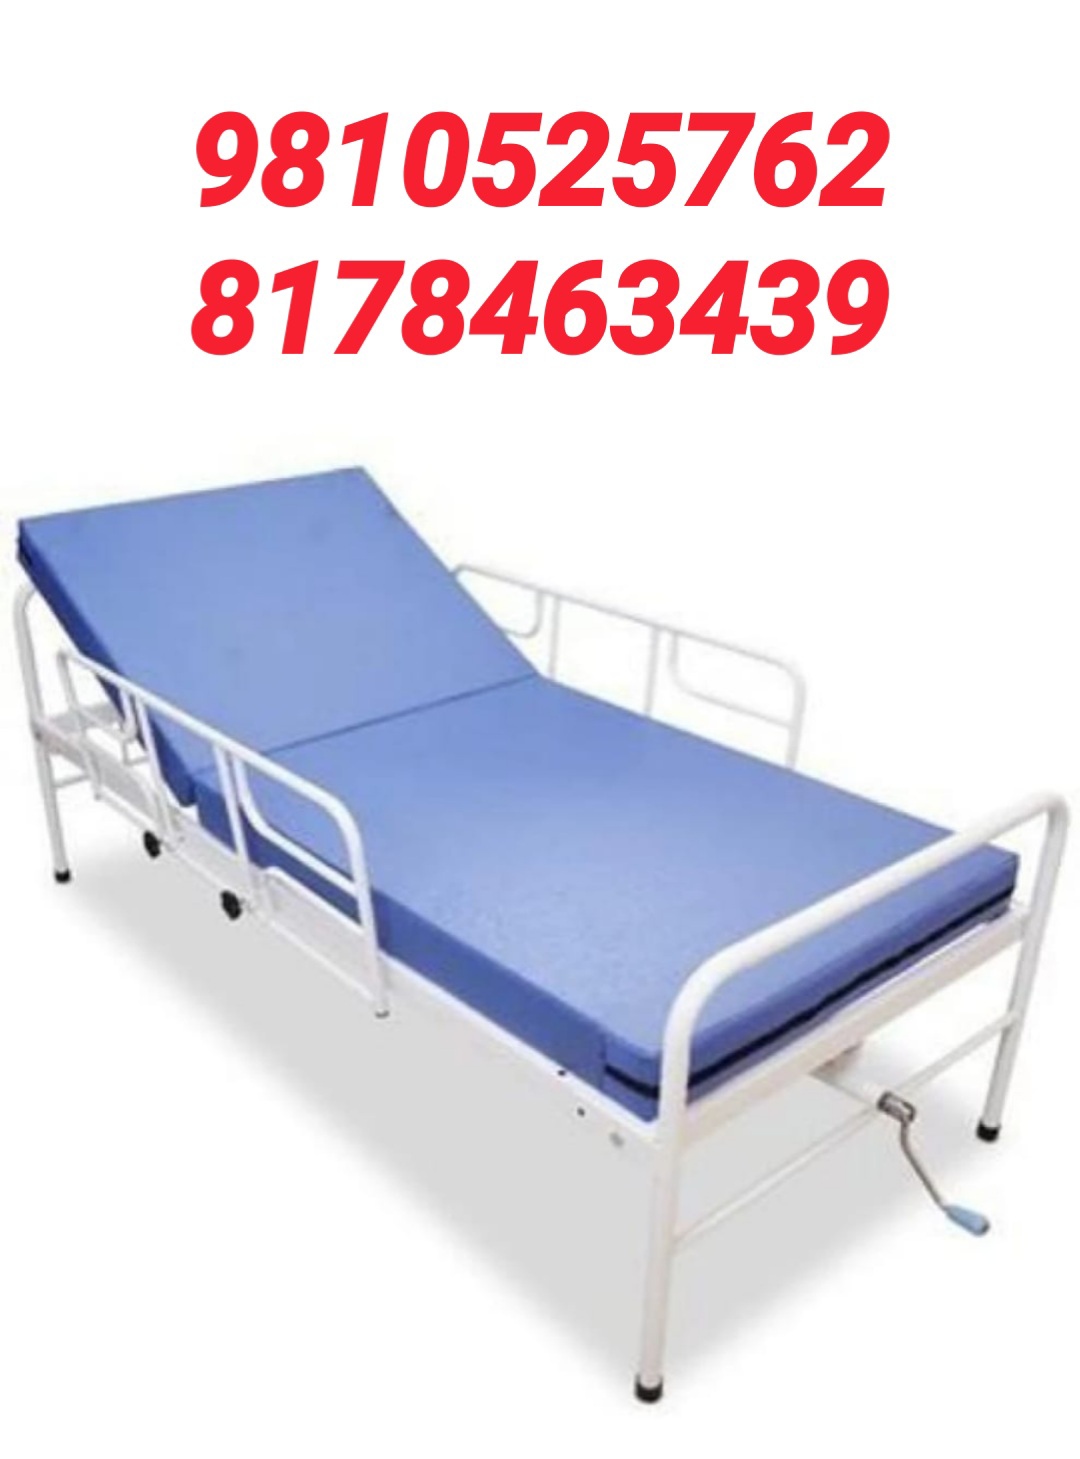 HOSPITAL BED RENT IN DILSHAD GARDEN 9810525762